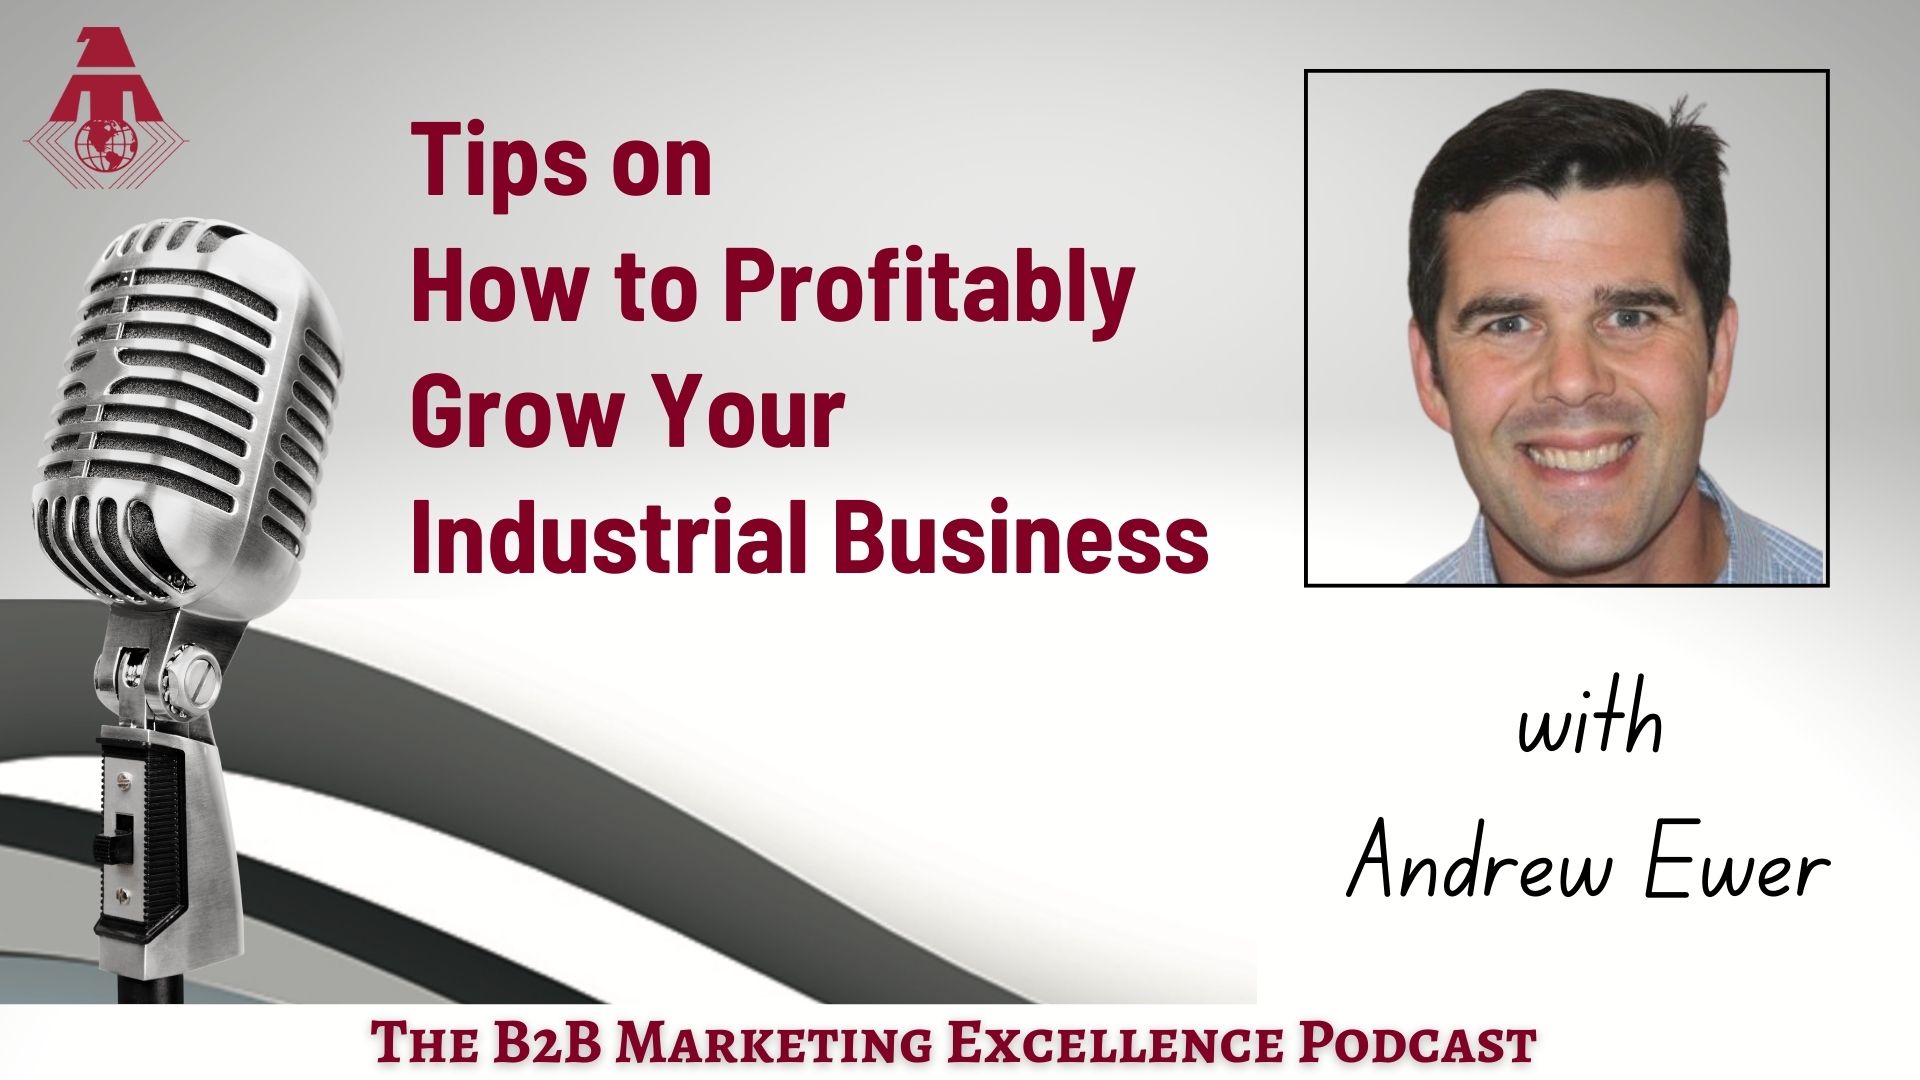 Podcast – Tips on How to Profitably Grow Your Industrial Business